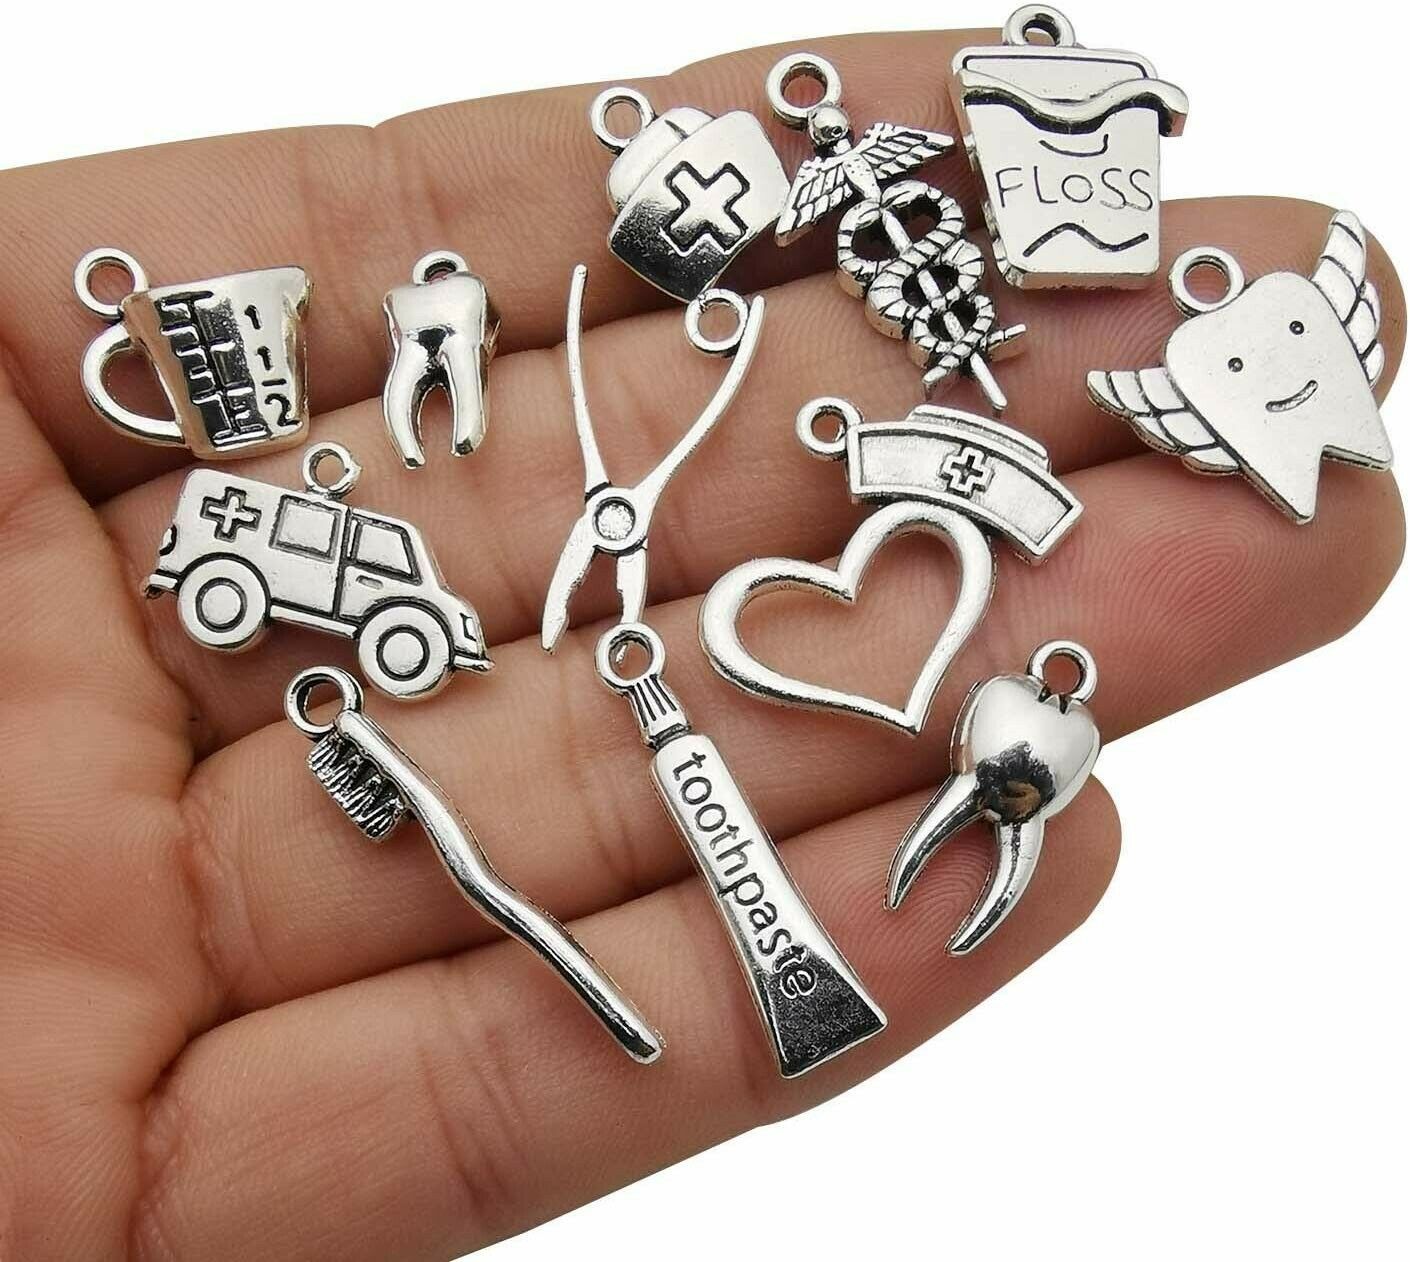 10 Dentist Charms Minneapolis Mall Hygienist Pendants Antiqued Themed Asso Silver Free Shipping Cheap Bargain Gift